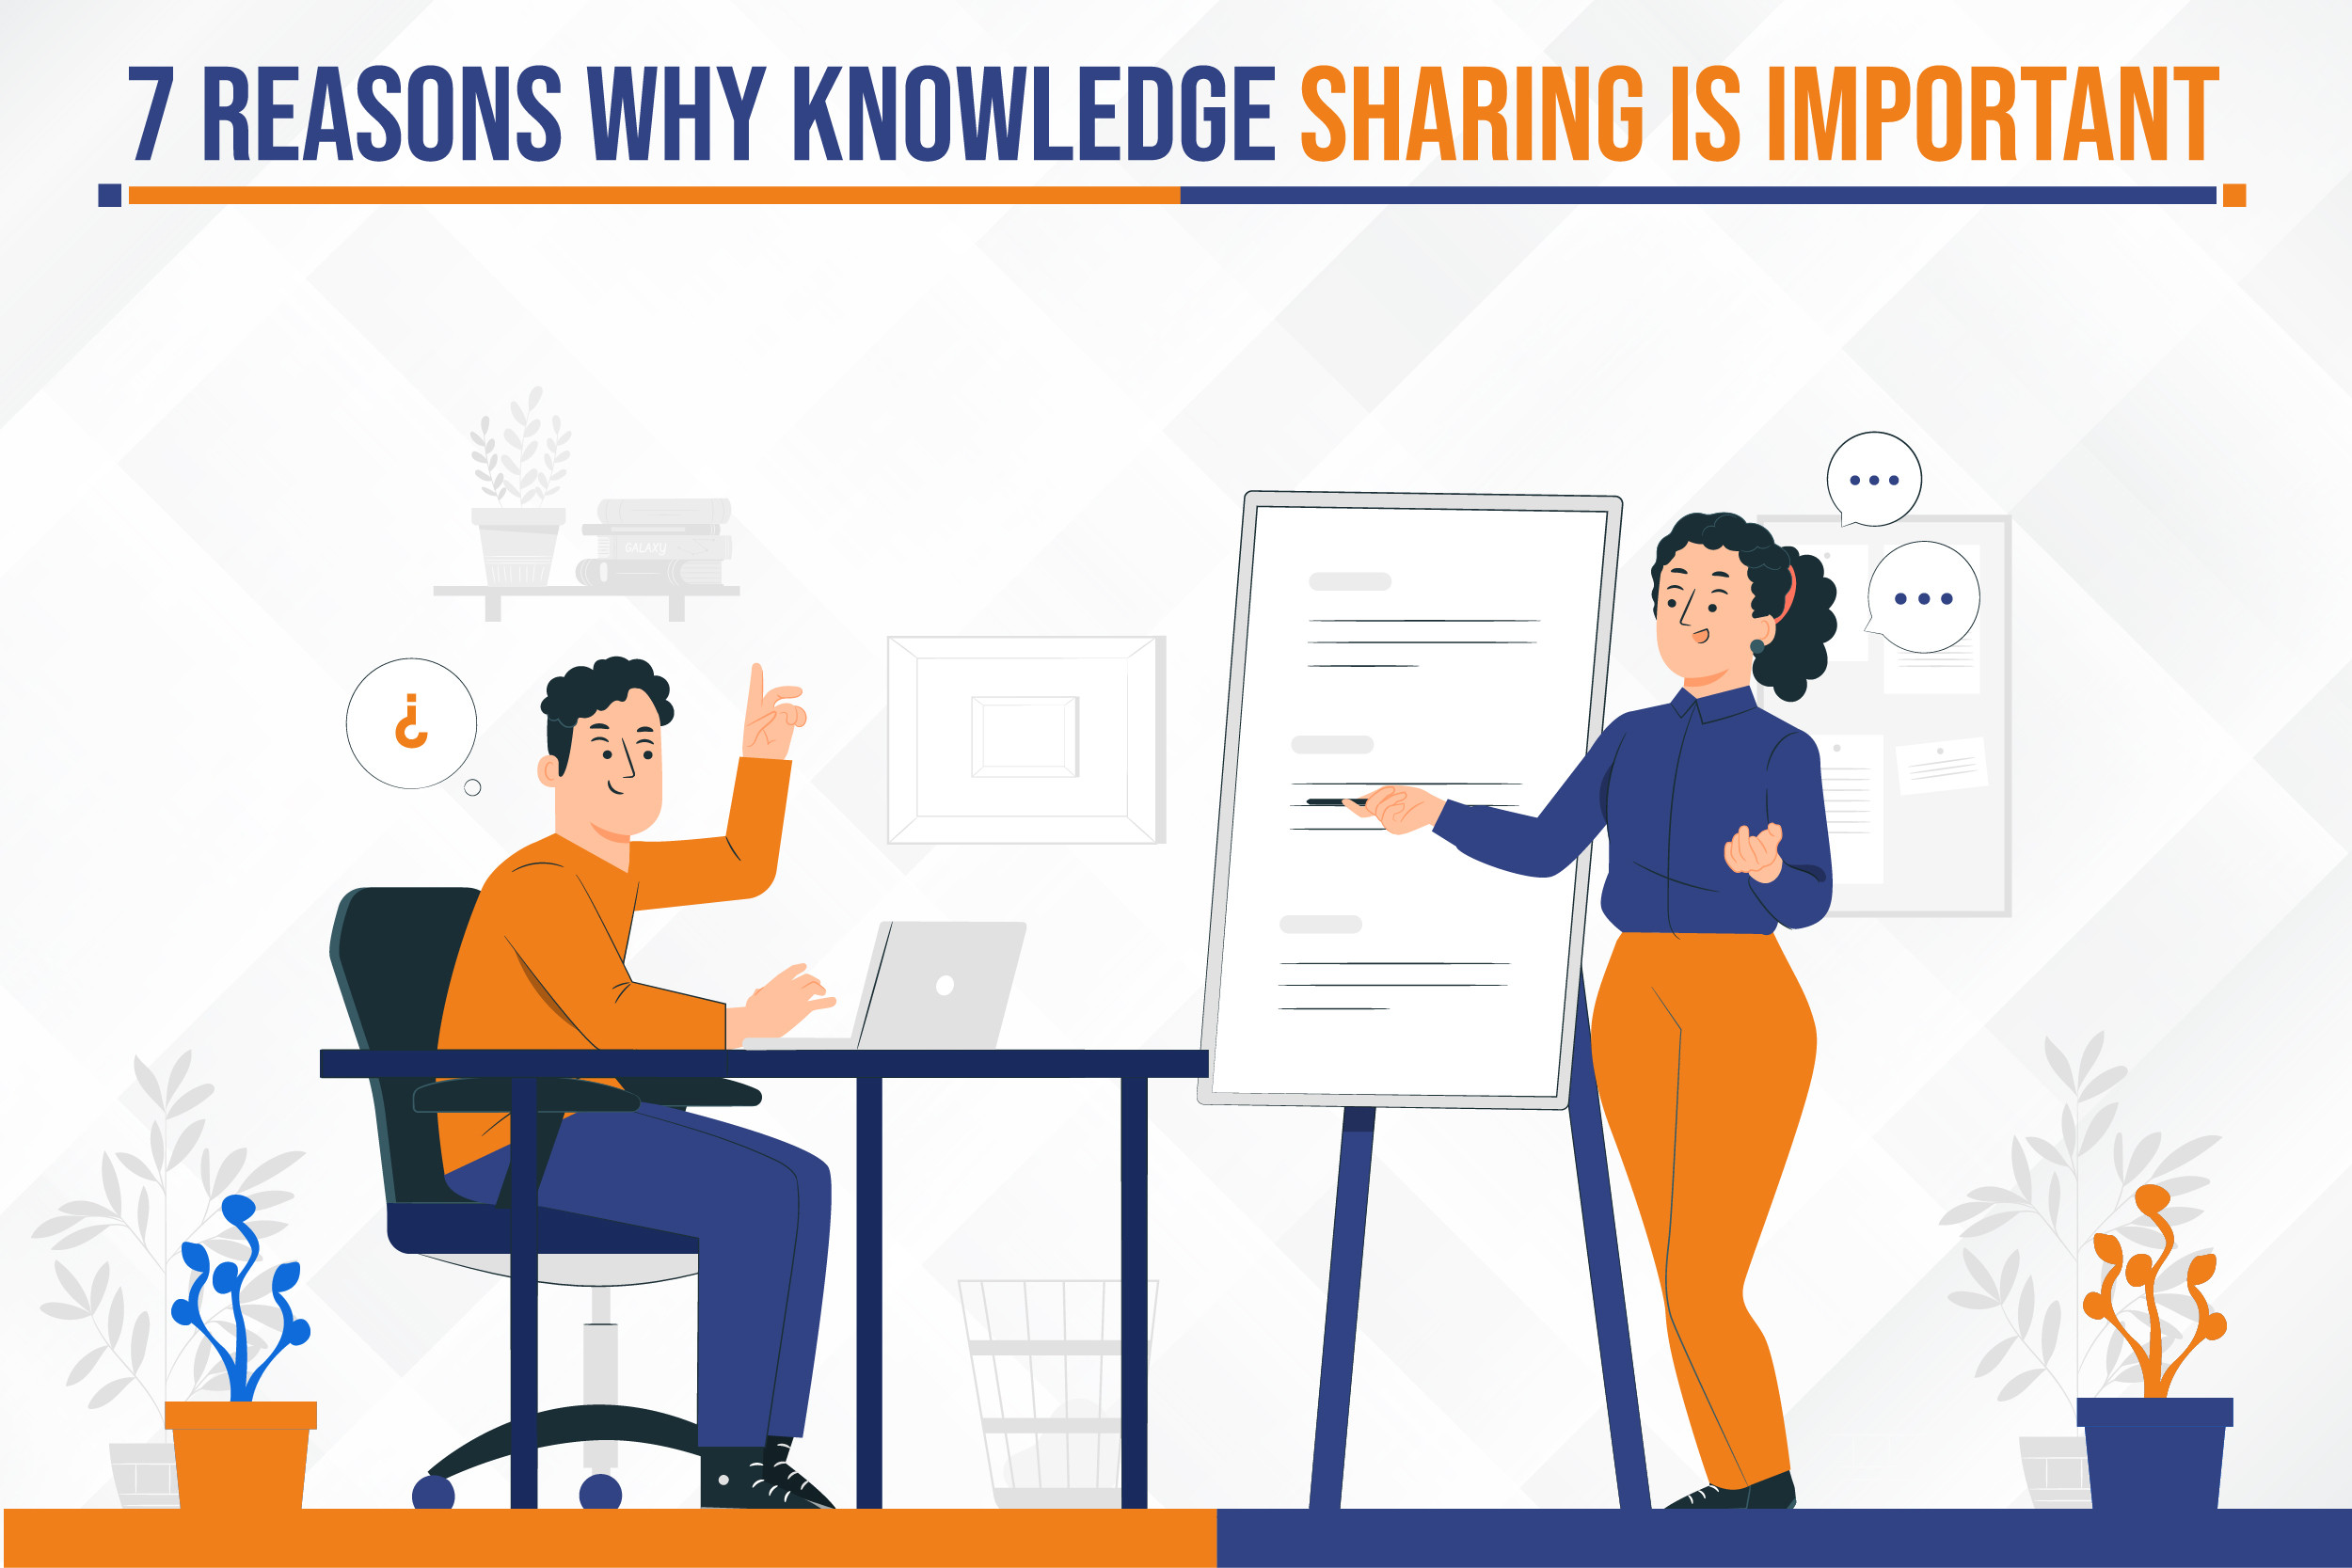 thesis in knowledge sharing